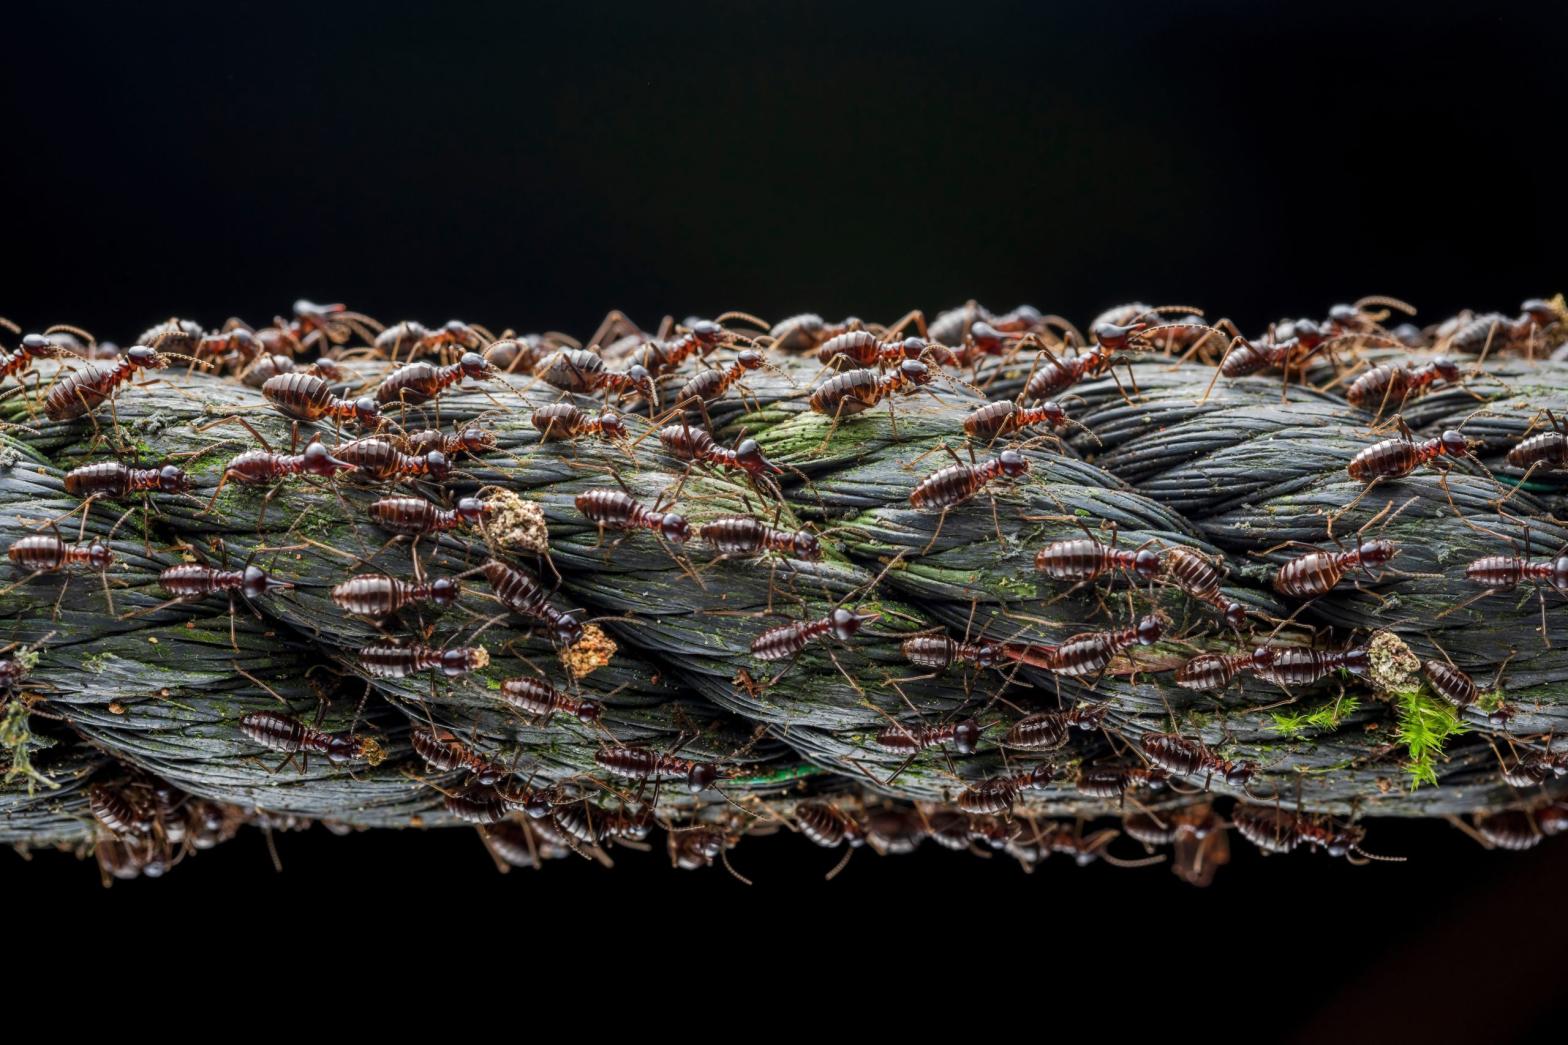 Soldier termites marching along a rope in Malaysia. (Image: Roberto García-Roa (CC BY 4.0))